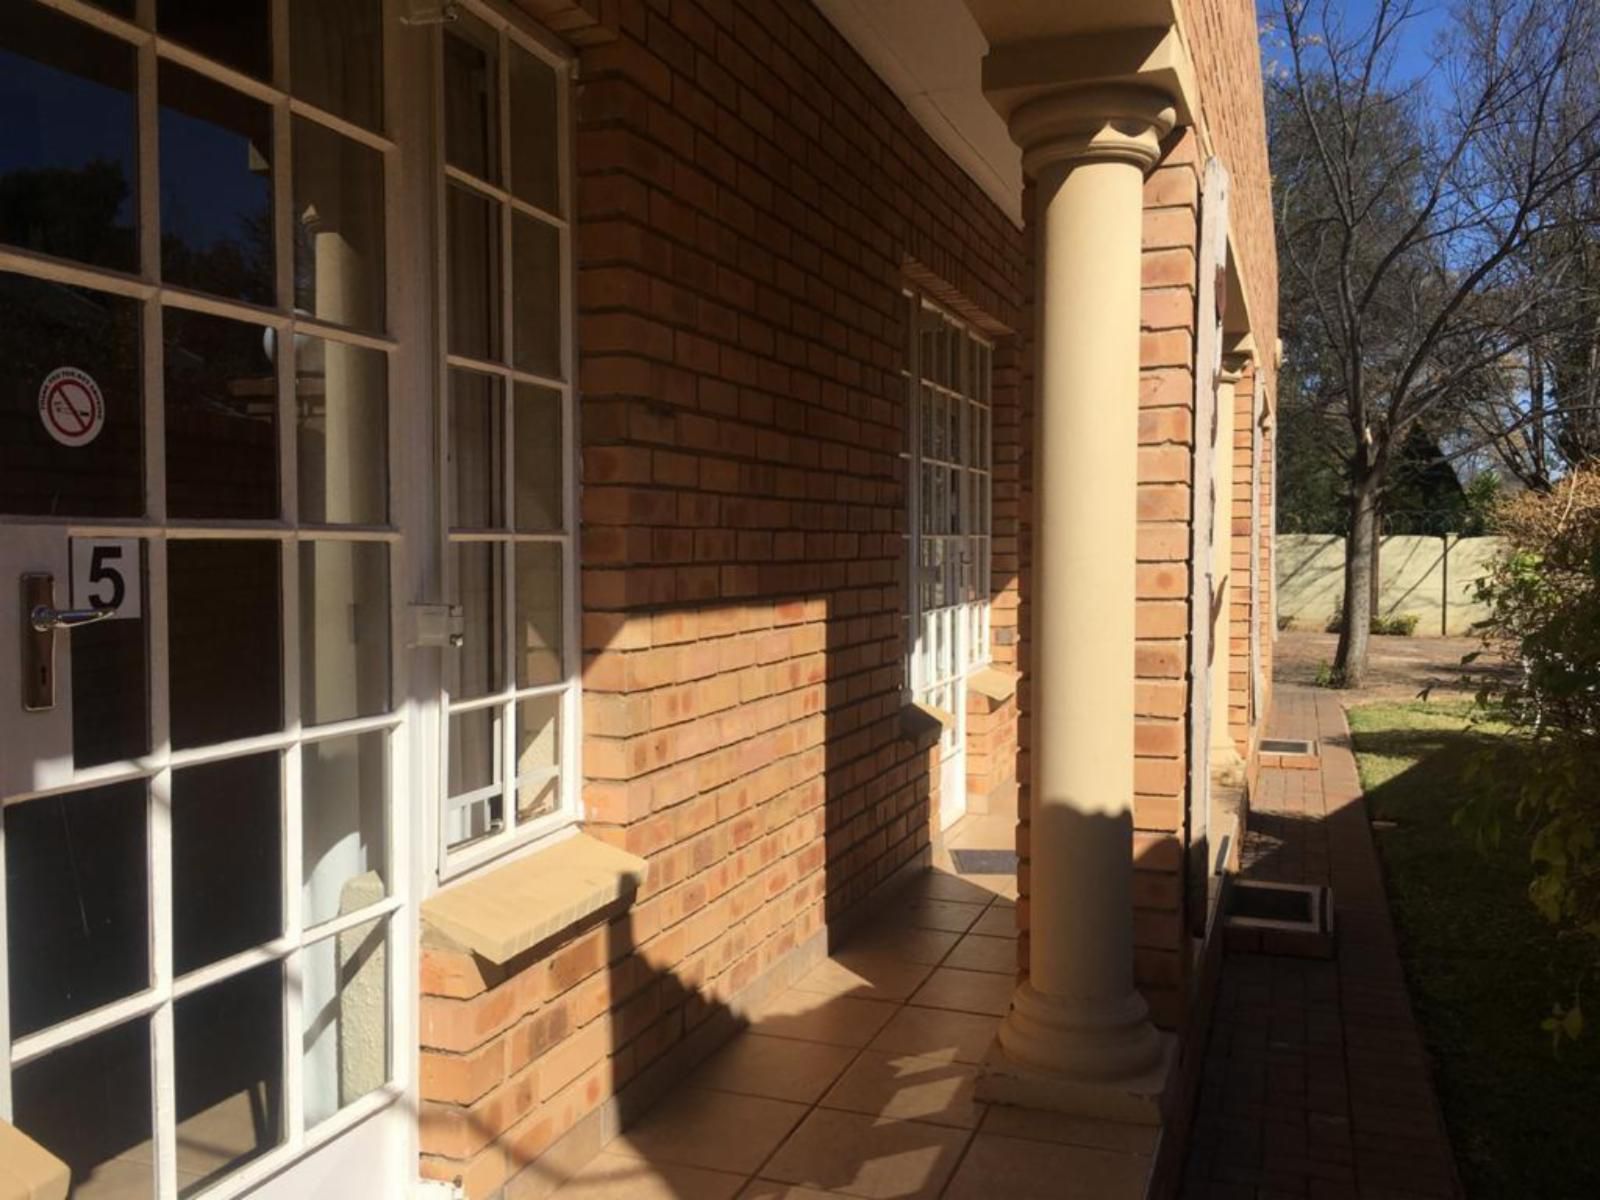 Alte Welkom Guesthouse Klerksdorp North West Province South Africa House, Building, Architecture, Brick Texture, Texture